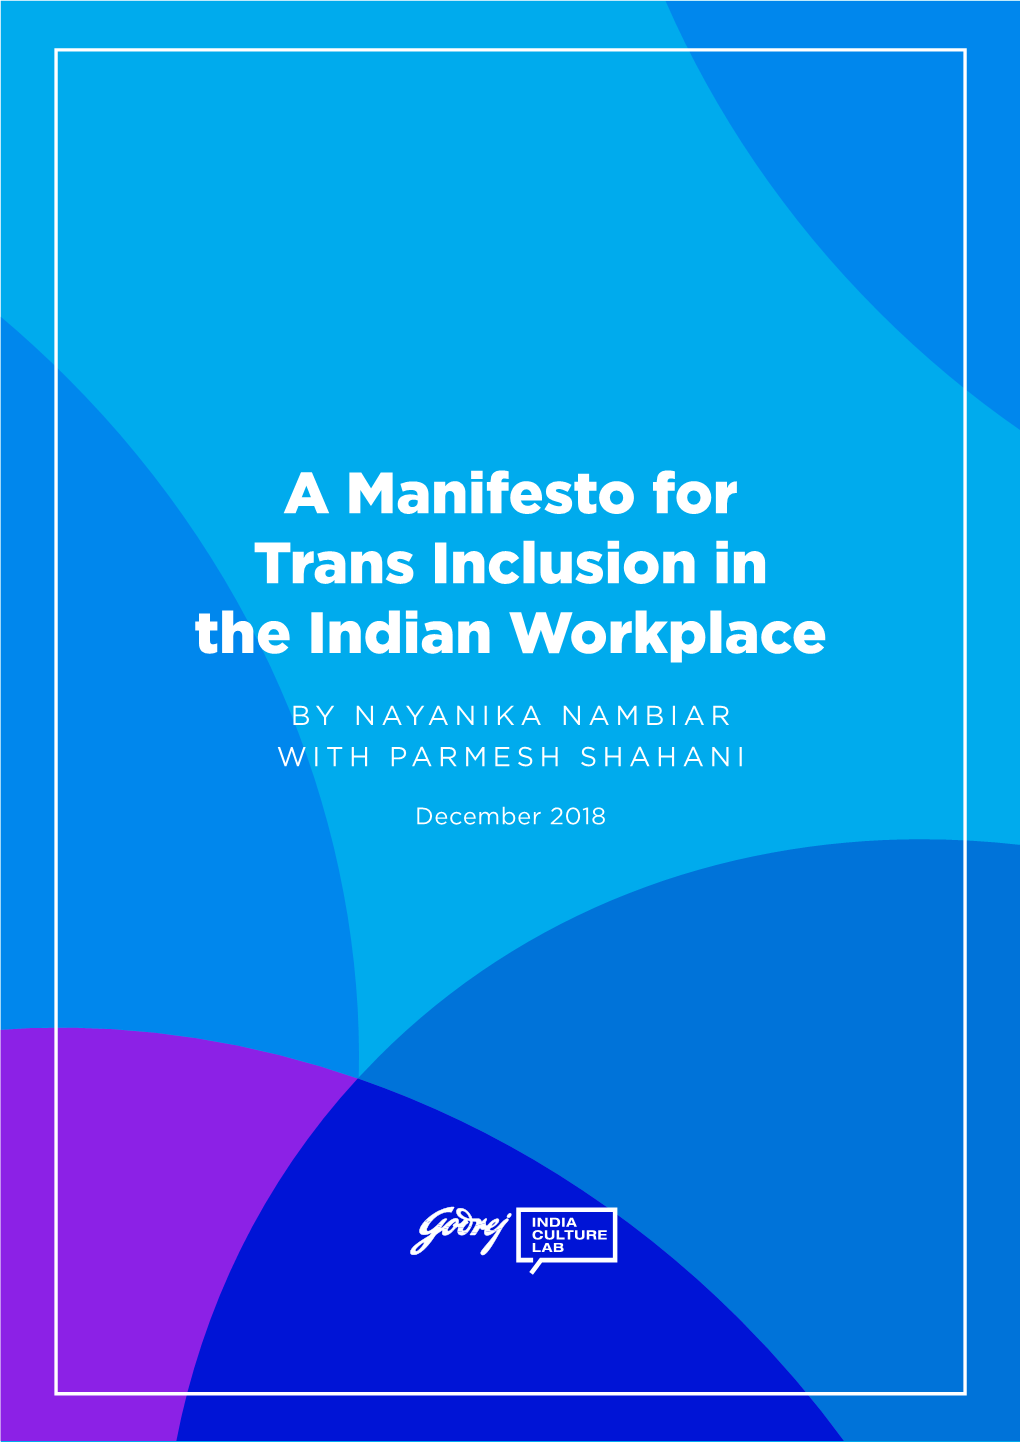 A Manifesto for Trans Inclusion in the Indian Workplace